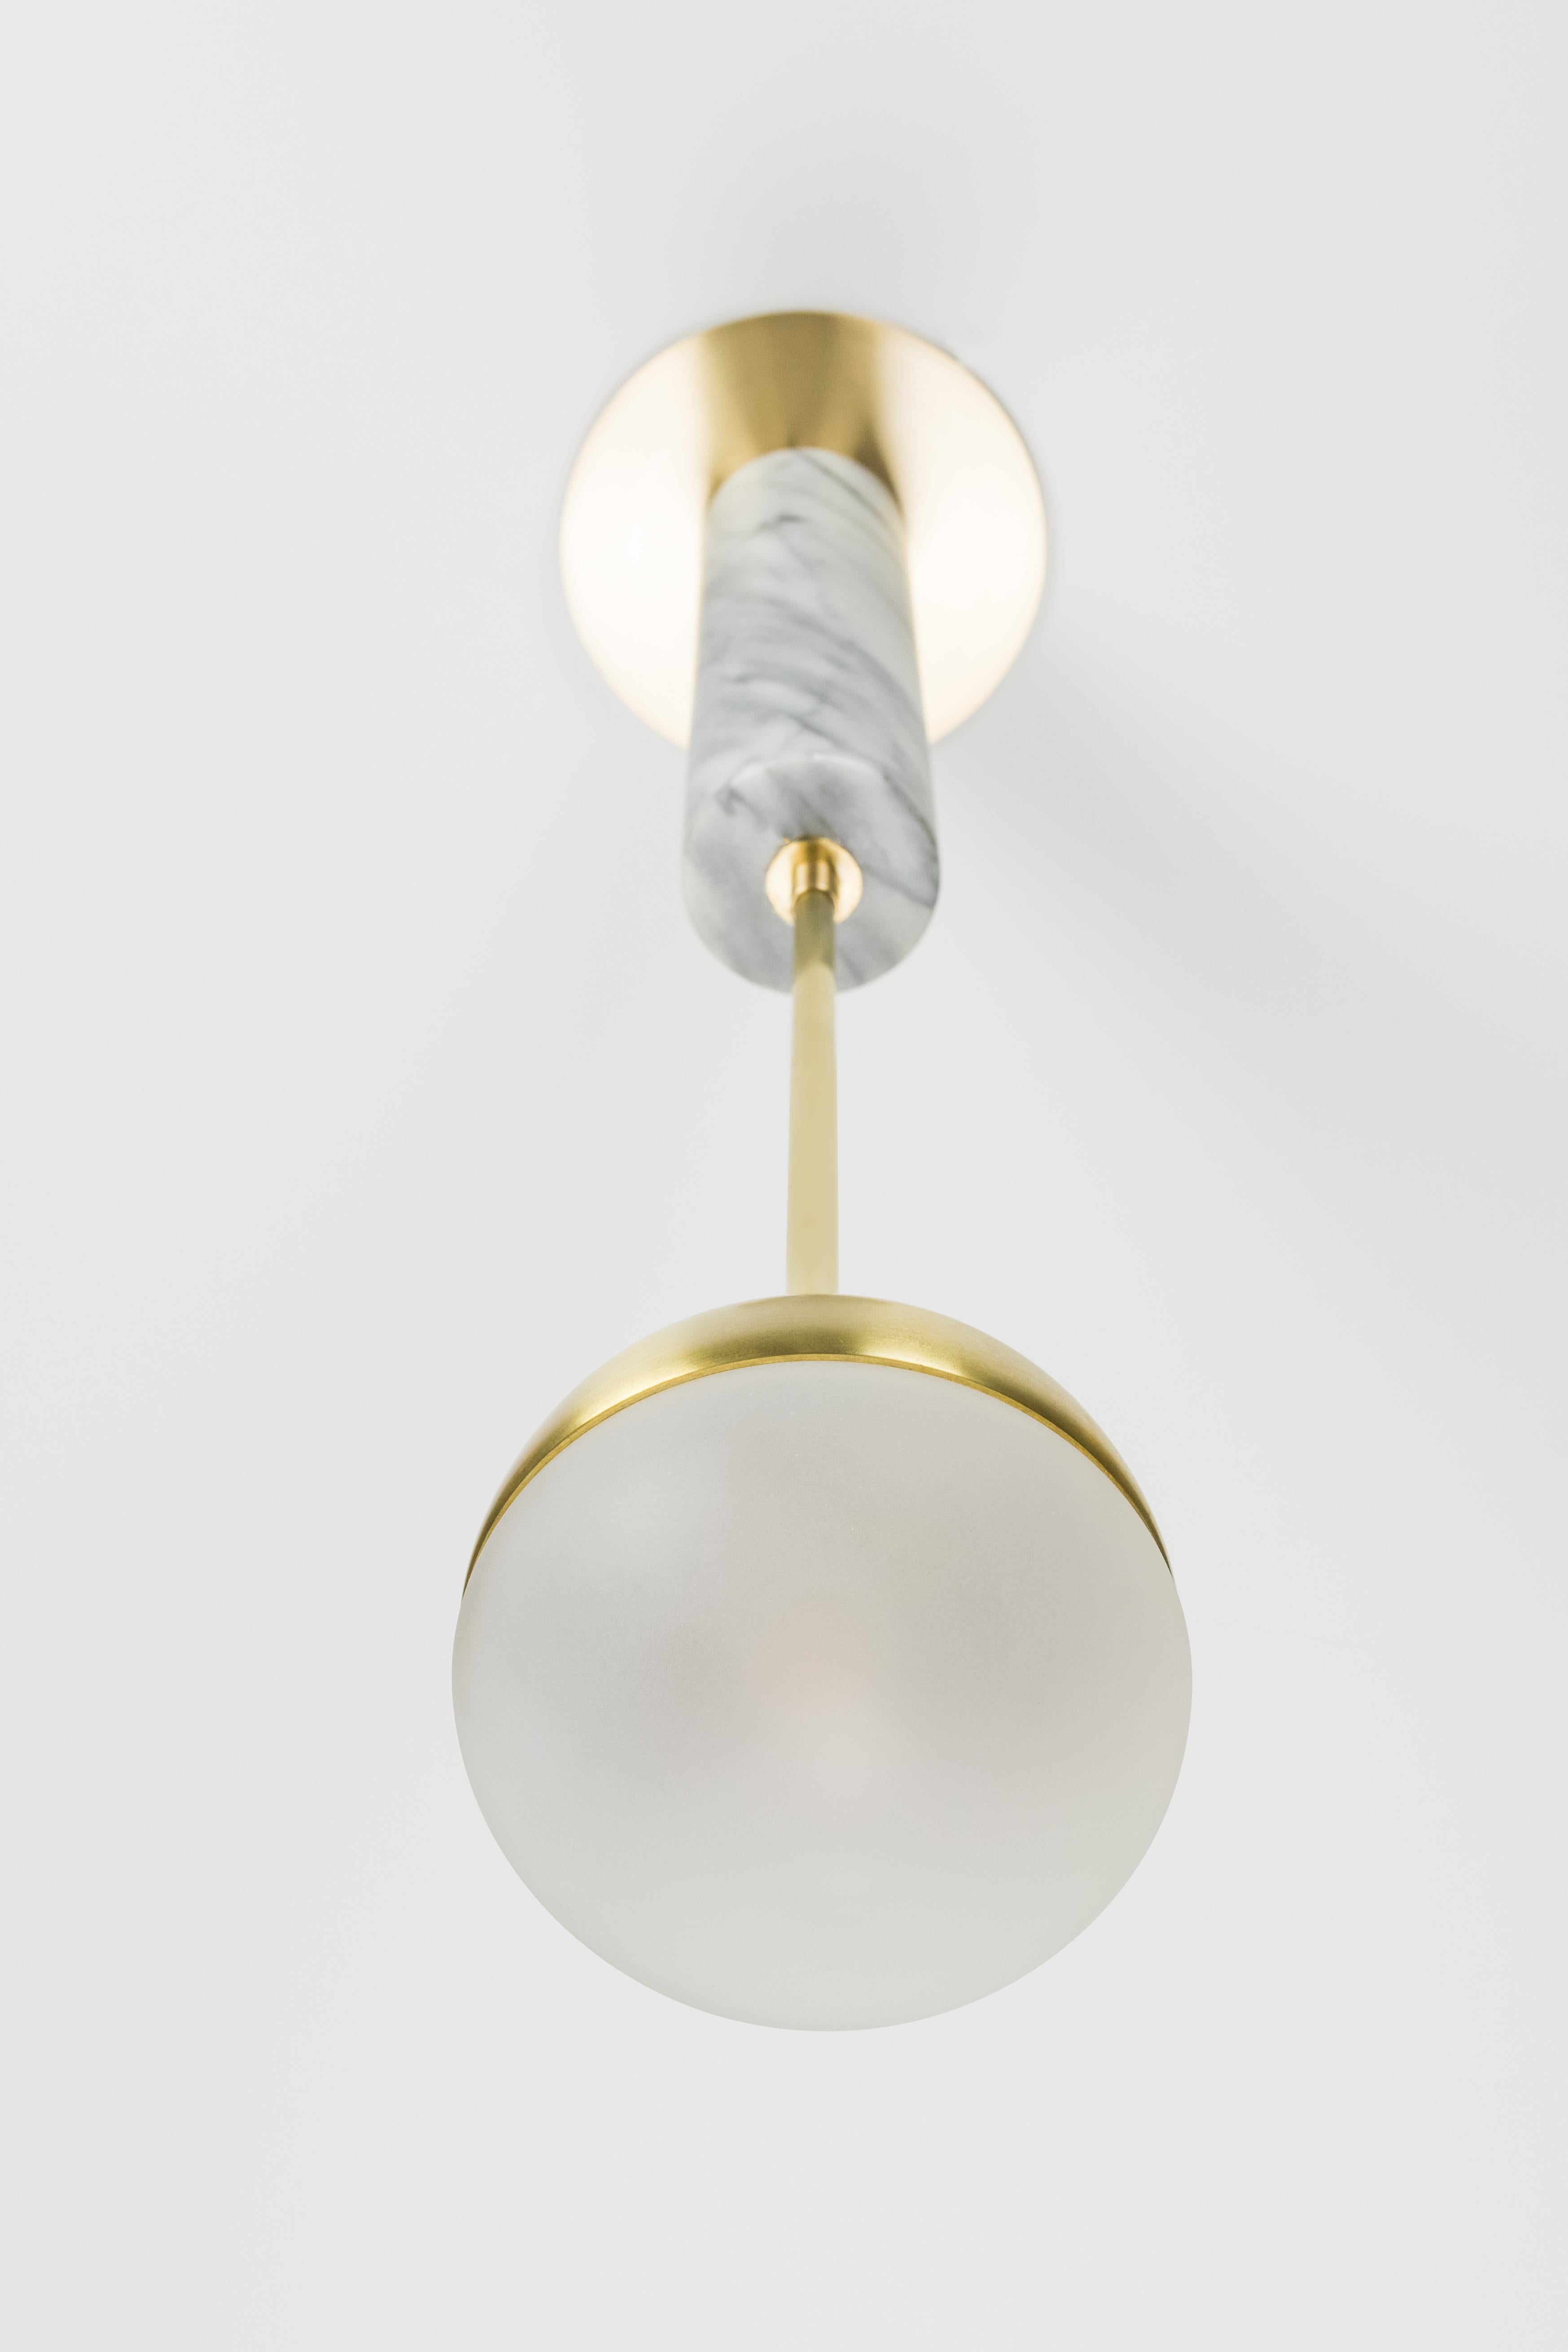 Kalin Asenov designs and fabricates lighting in Savannah, GA. Asenov works with a team of artisans and manufacturers to prototype, and build all pieces in his studio.

Asenov’s designs are driven by narrative, every object is an expression of a